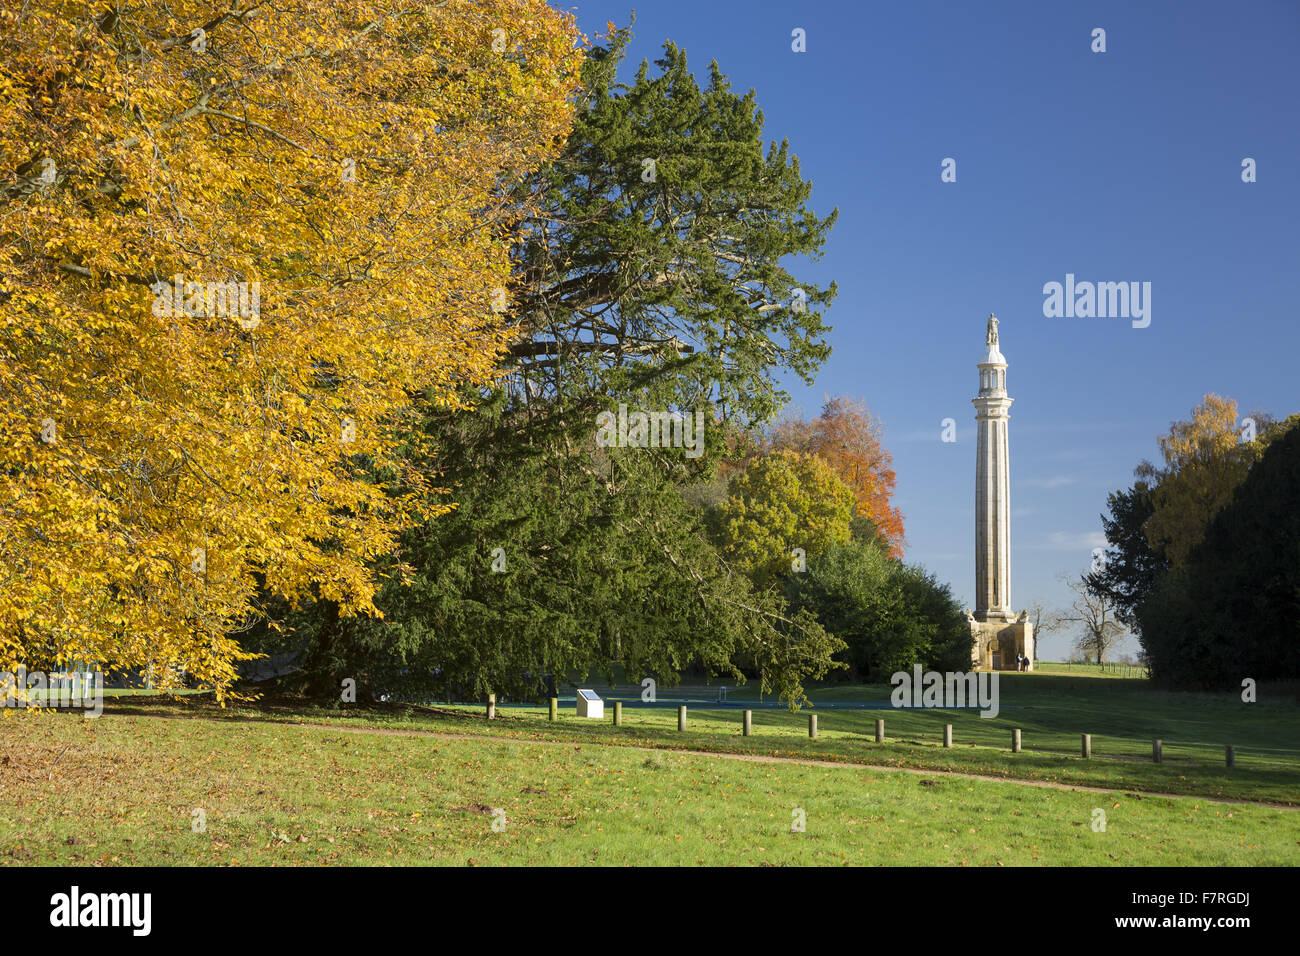 The Cobham Monument in the autumn at Stowe, Buckinghamshire. Stowe is a landscaped garden with picture-perfect views, winding paths, lakeside walks and classical temples. Stock Photo